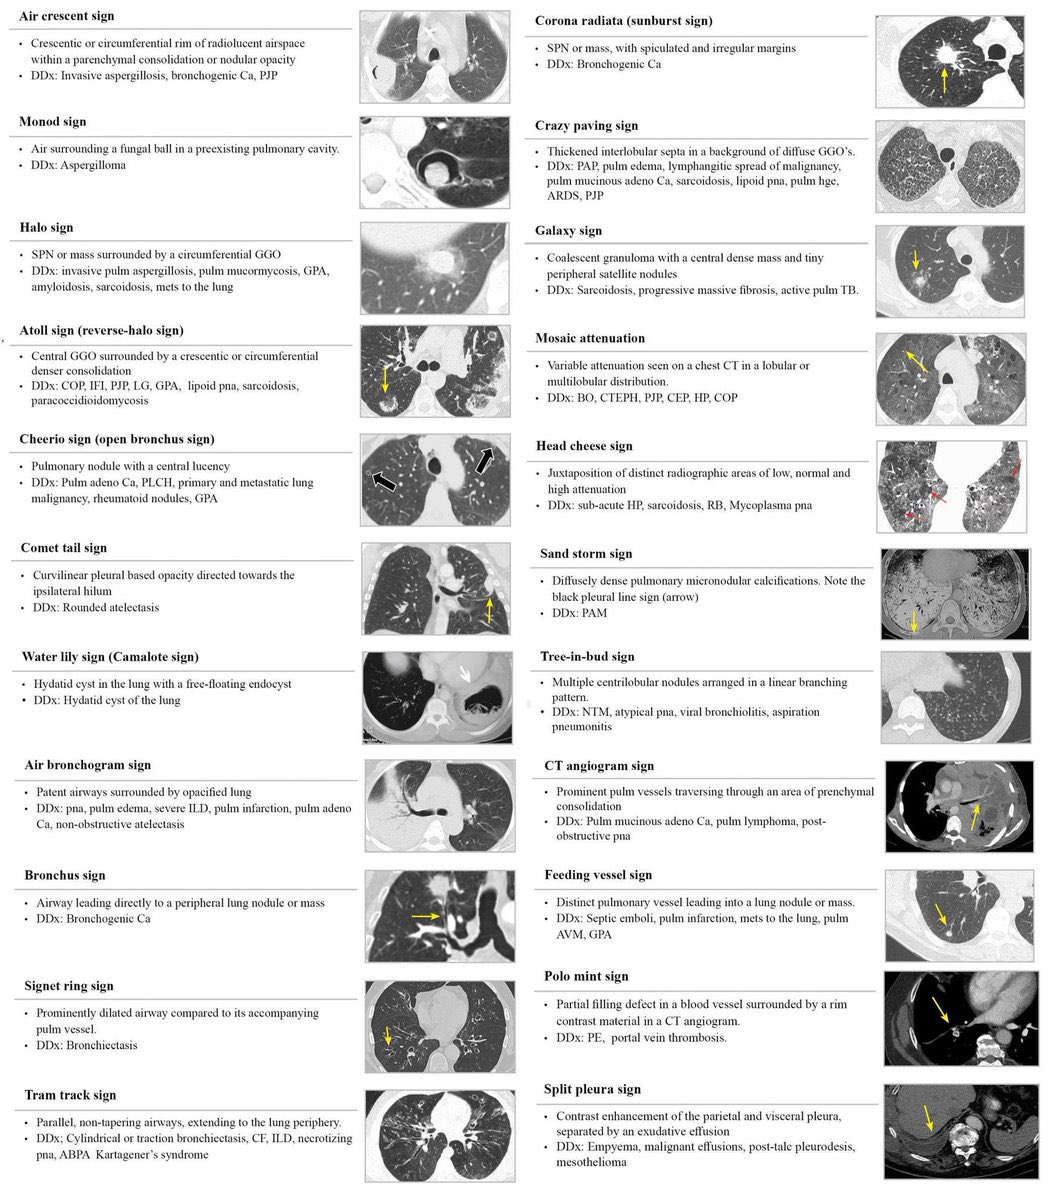 Some common cardiopulmonary signs 🫁 #radiology #medtwitter